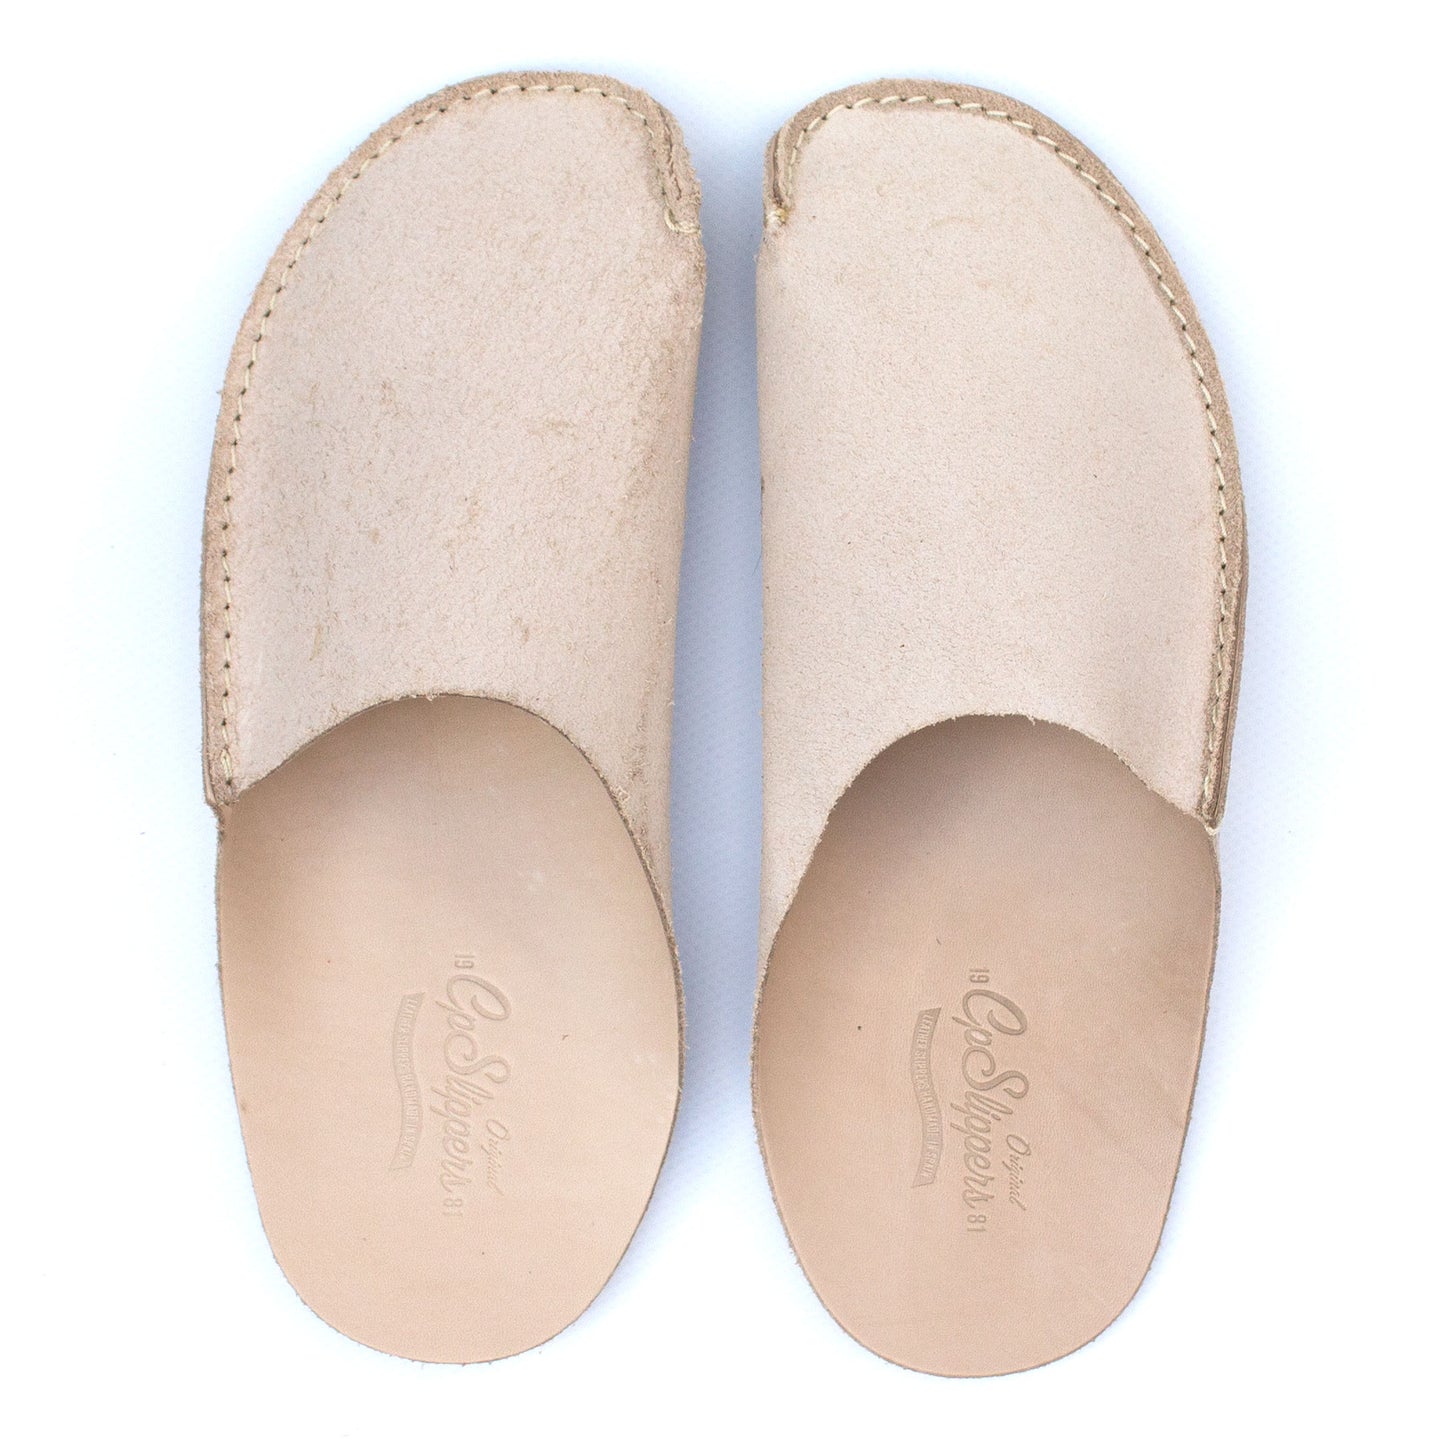 Natural Leather Slippers for men and women by CP Slippers Minimalist